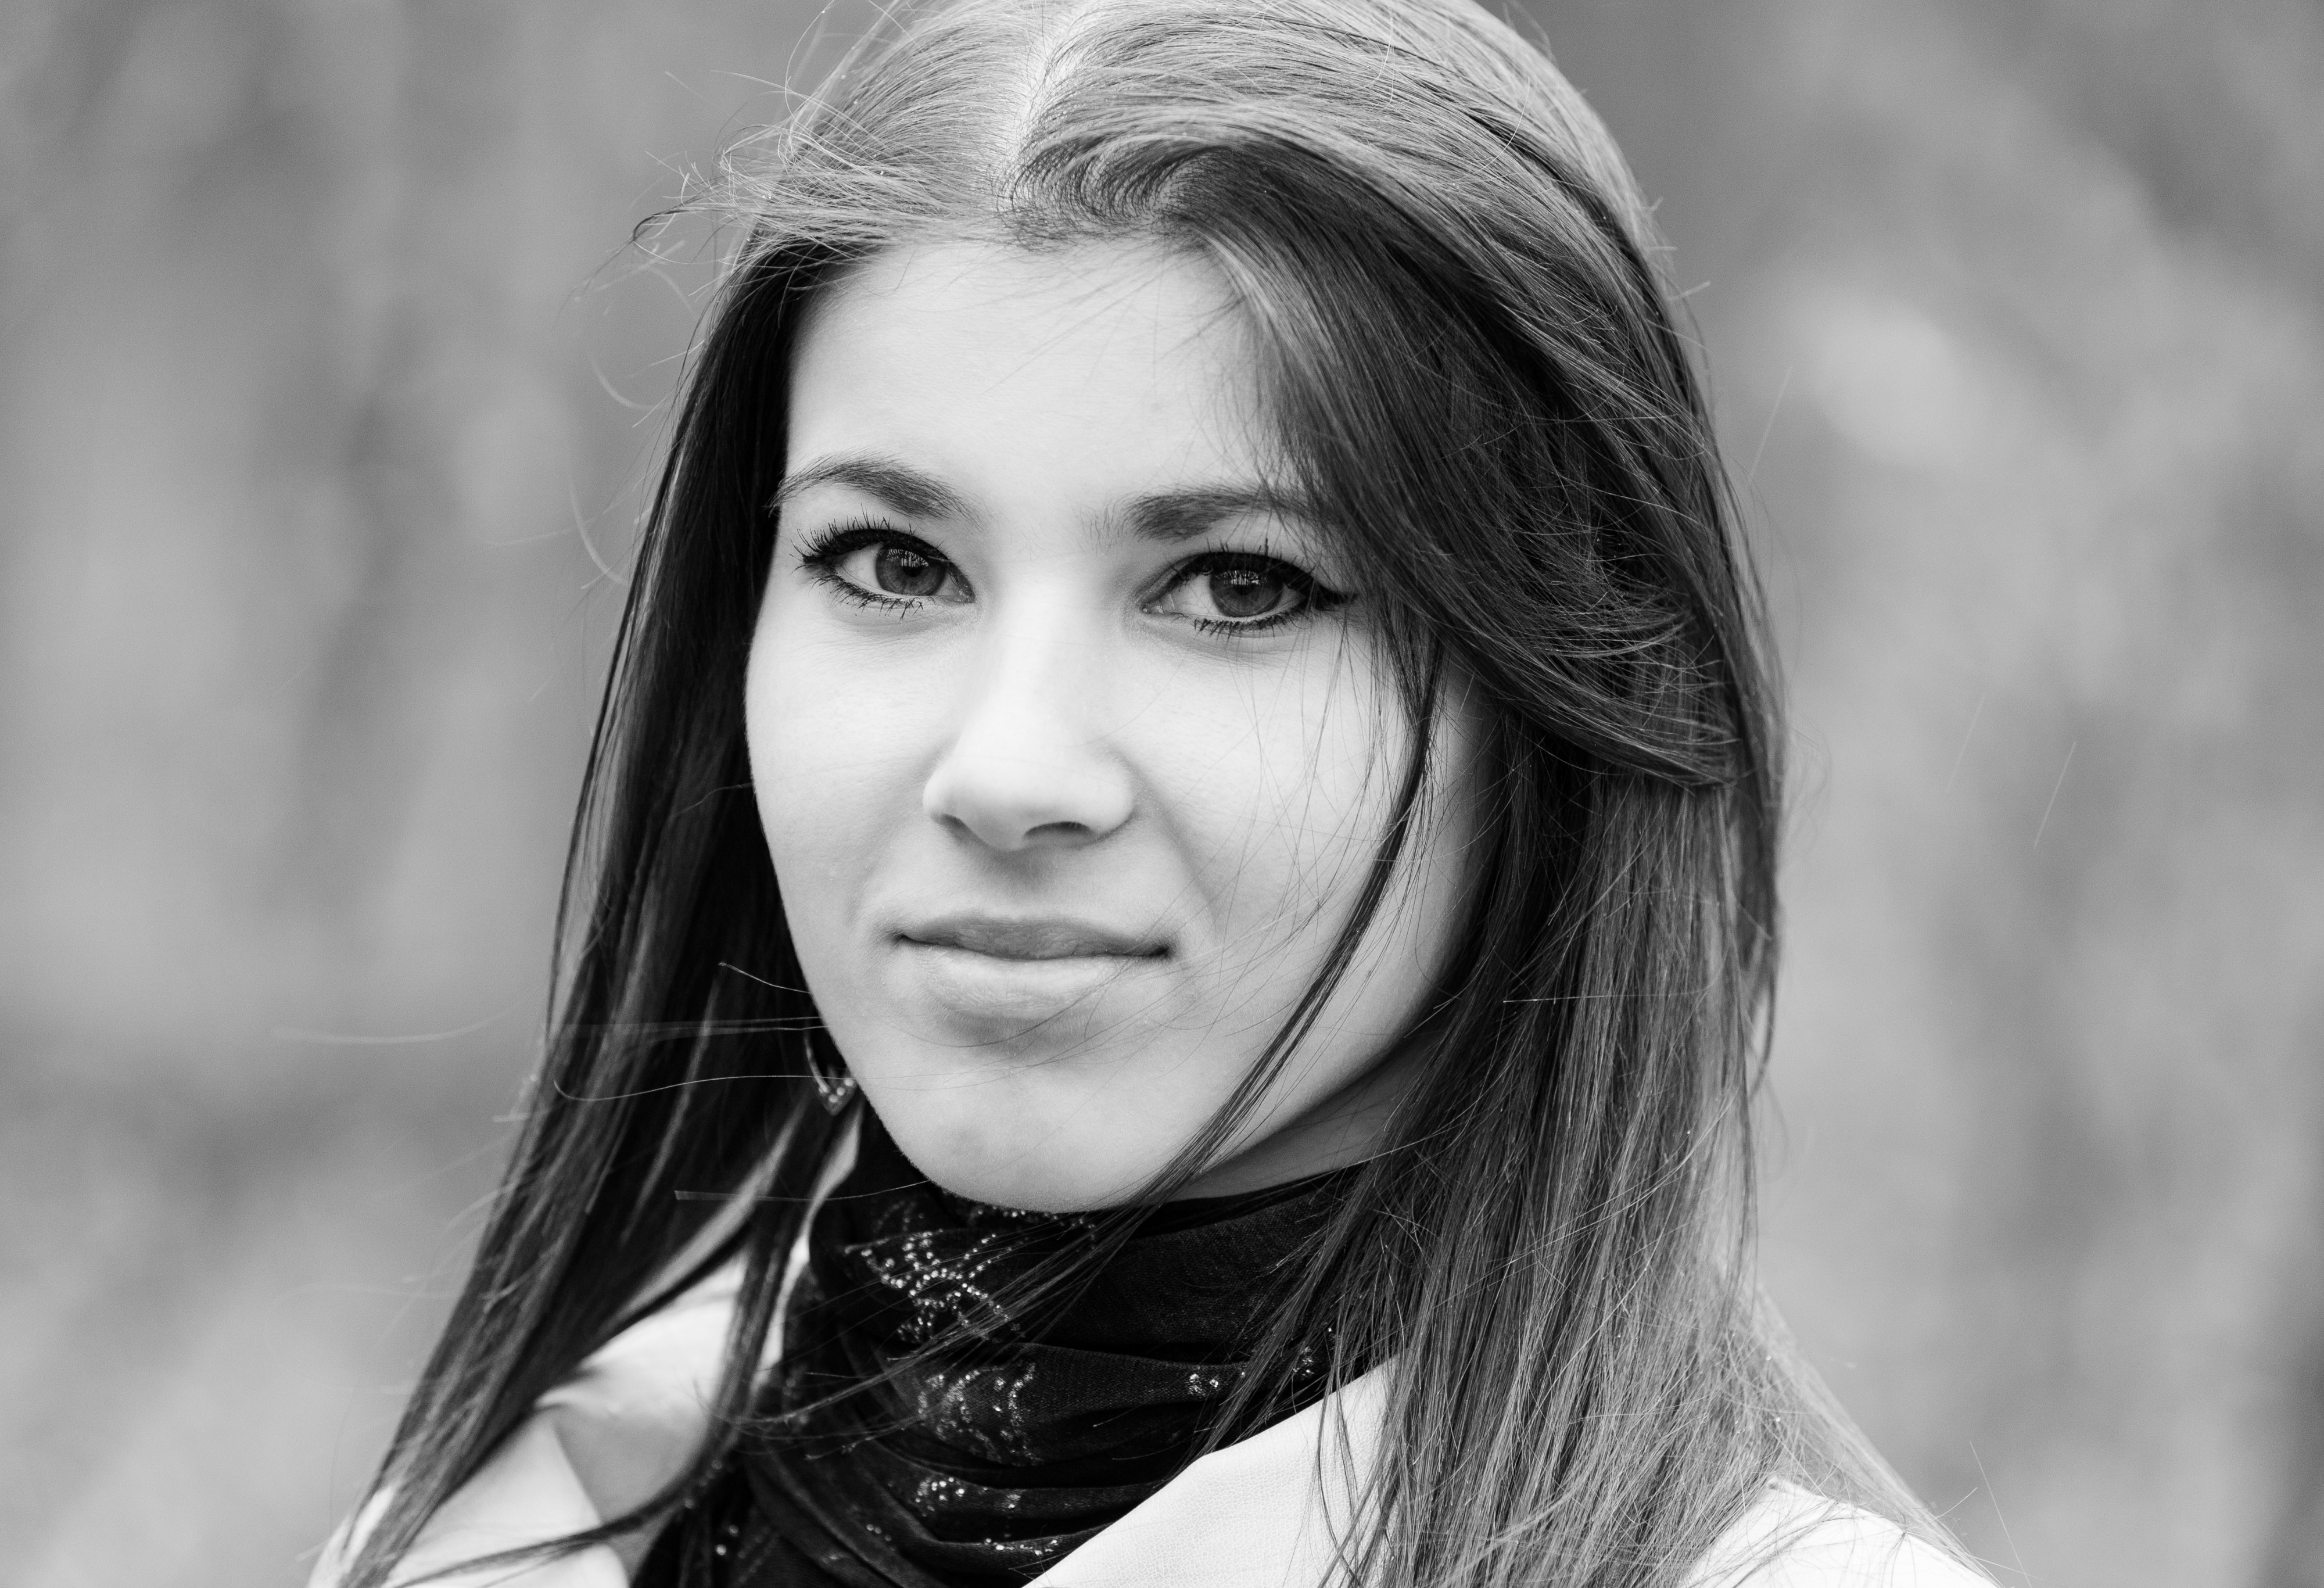 an amazingly attractive brunette Catholic girl photographed in April 2014, picture 15 out of 16, black and white